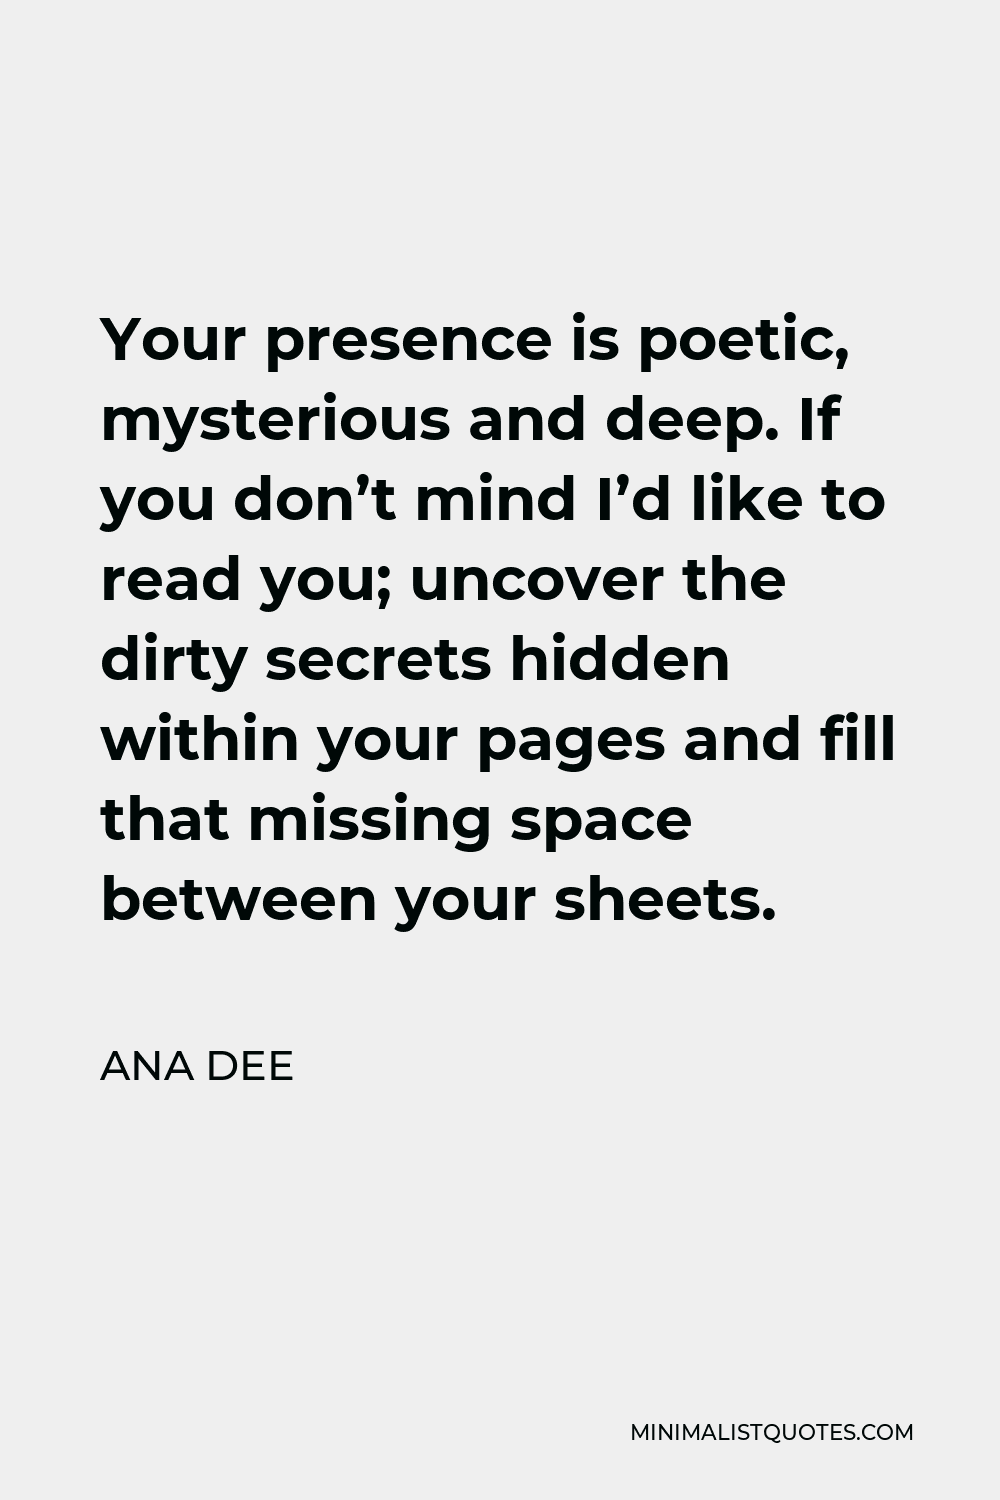 Ana Dee Quote - Your presence is poetic, mysterious and deep. If you don’t mind I’d like to read you; uncover the dirty secrets hidden within your pages and fill that missing space between your sheets.